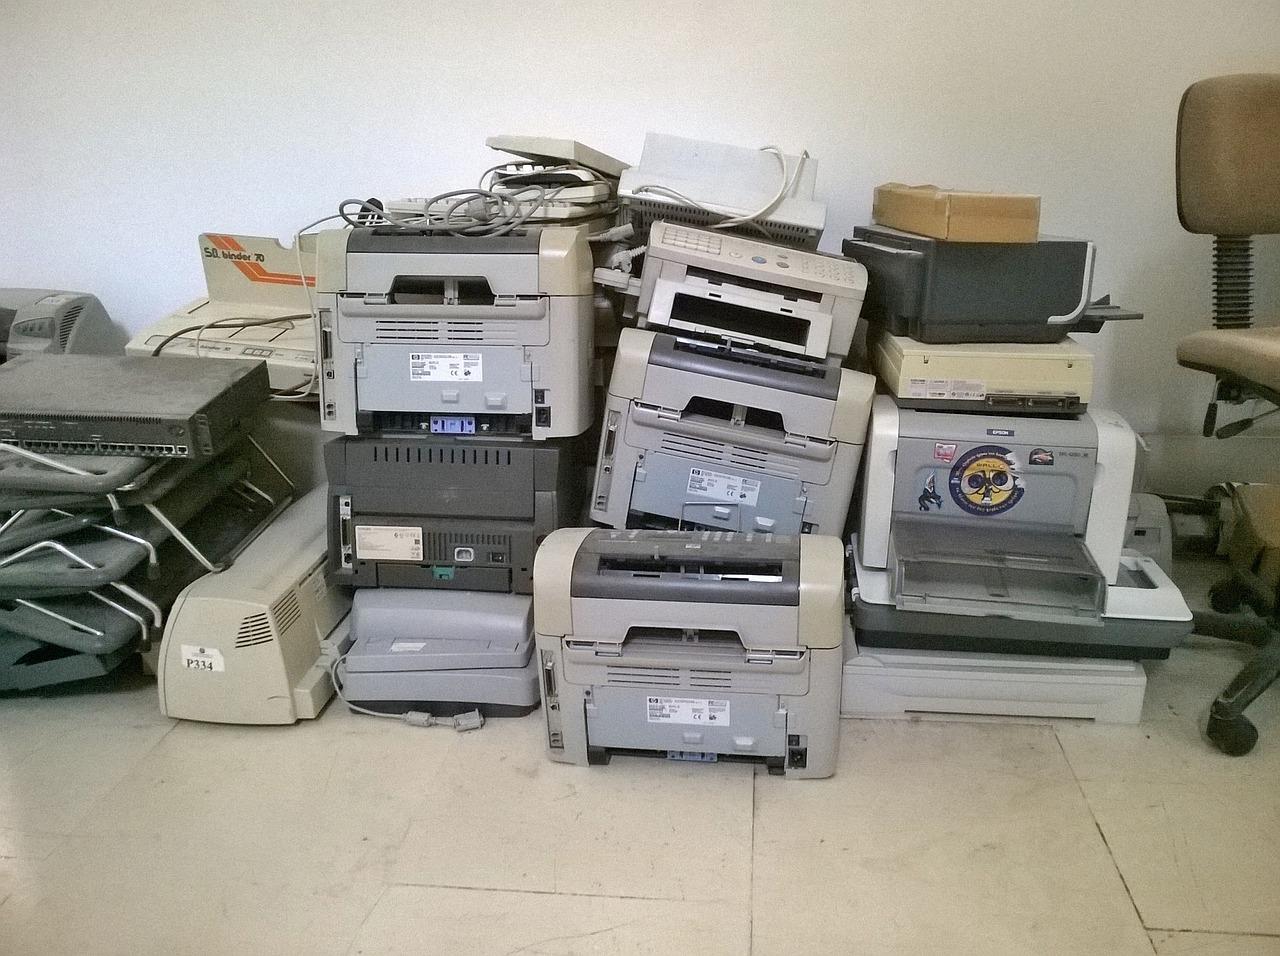 Bunch of old printers in a storage